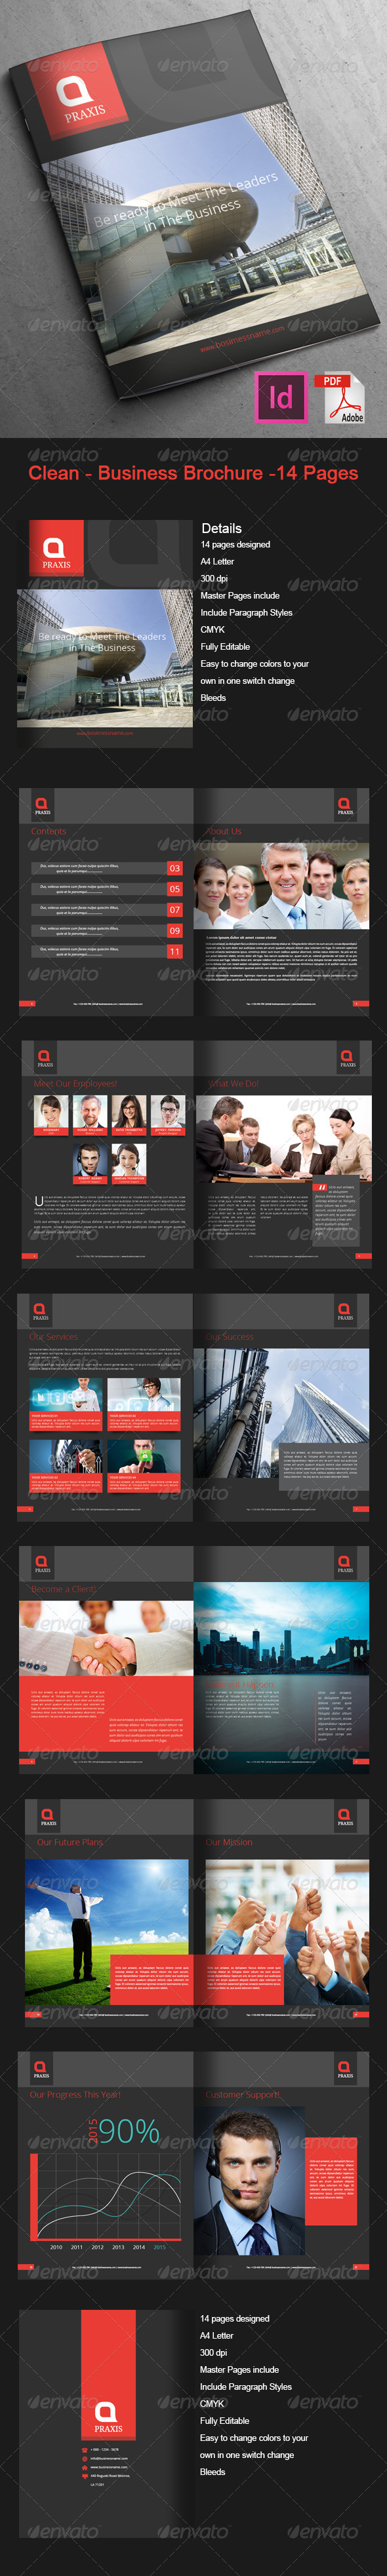 GraphicRiver Clean Business Brochure 14 Pages 7686892